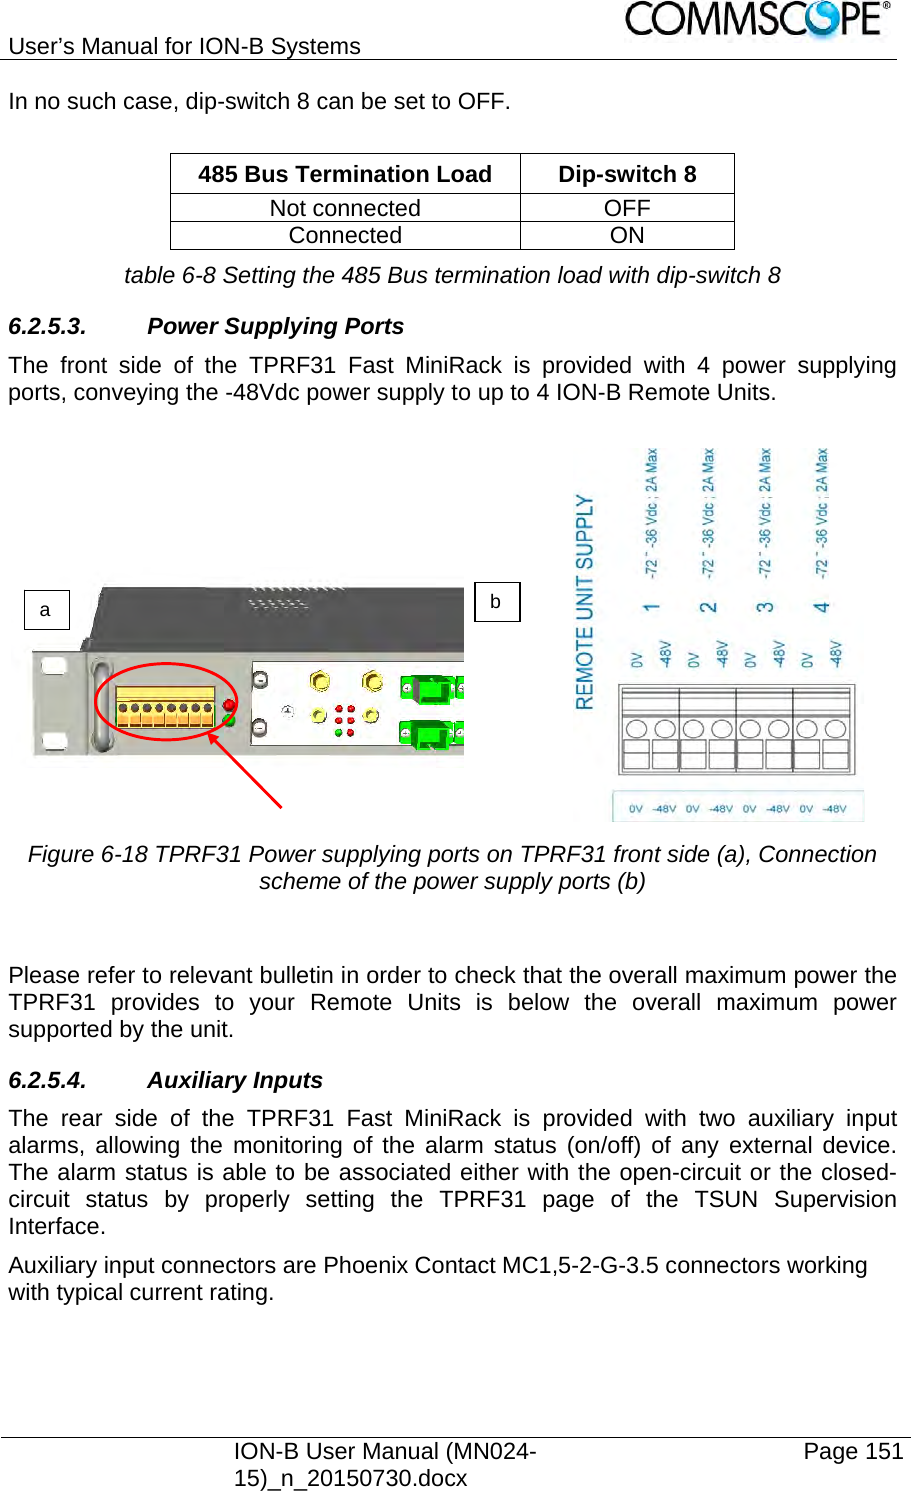 User’s Manual for ION-B Systems    ION-B User Manual (MN024-15)_n_20150730.docx  Page 151 In no such case, dip-switch 8 can be set to OFF.  485 Bus Termination Load   Dip-switch 8  Not connected  OFF Connected ON table 6-8 Setting the 485 Bus termination load with dip-switch 8 6.2.5.3.  Power Supplying Ports The front side of the TPRF31 Fast MiniRack is provided with 4 power supplying ports, conveying the -48Vdc power supply to up to 4 ION-B Remote Units.               Figure 6-18 TPRF31 Power supplying ports on TPRF31 front side (a), Connection scheme of the power supply ports (b)  Please refer to relevant bulletin in order to check that the overall maximum power the TPRF31 provides to your Remote Units is below the overall maximum power supported by the unit. 6.2.5.4. Auxiliary Inputs The rear side of the TPRF31 Fast MiniRack is provided with two auxiliary input alarms, allowing the monitoring of the alarm status (on/off) of any external device. The alarm status is able to be associated either with the open-circuit or the closed-circuit status by properly setting the TPRF31 page of the TSUN Supervision Interface. Auxiliary input connectors are Phoenix Contact MC1,5-2-G-3.5 connectors working with typical current rating.  a  b 